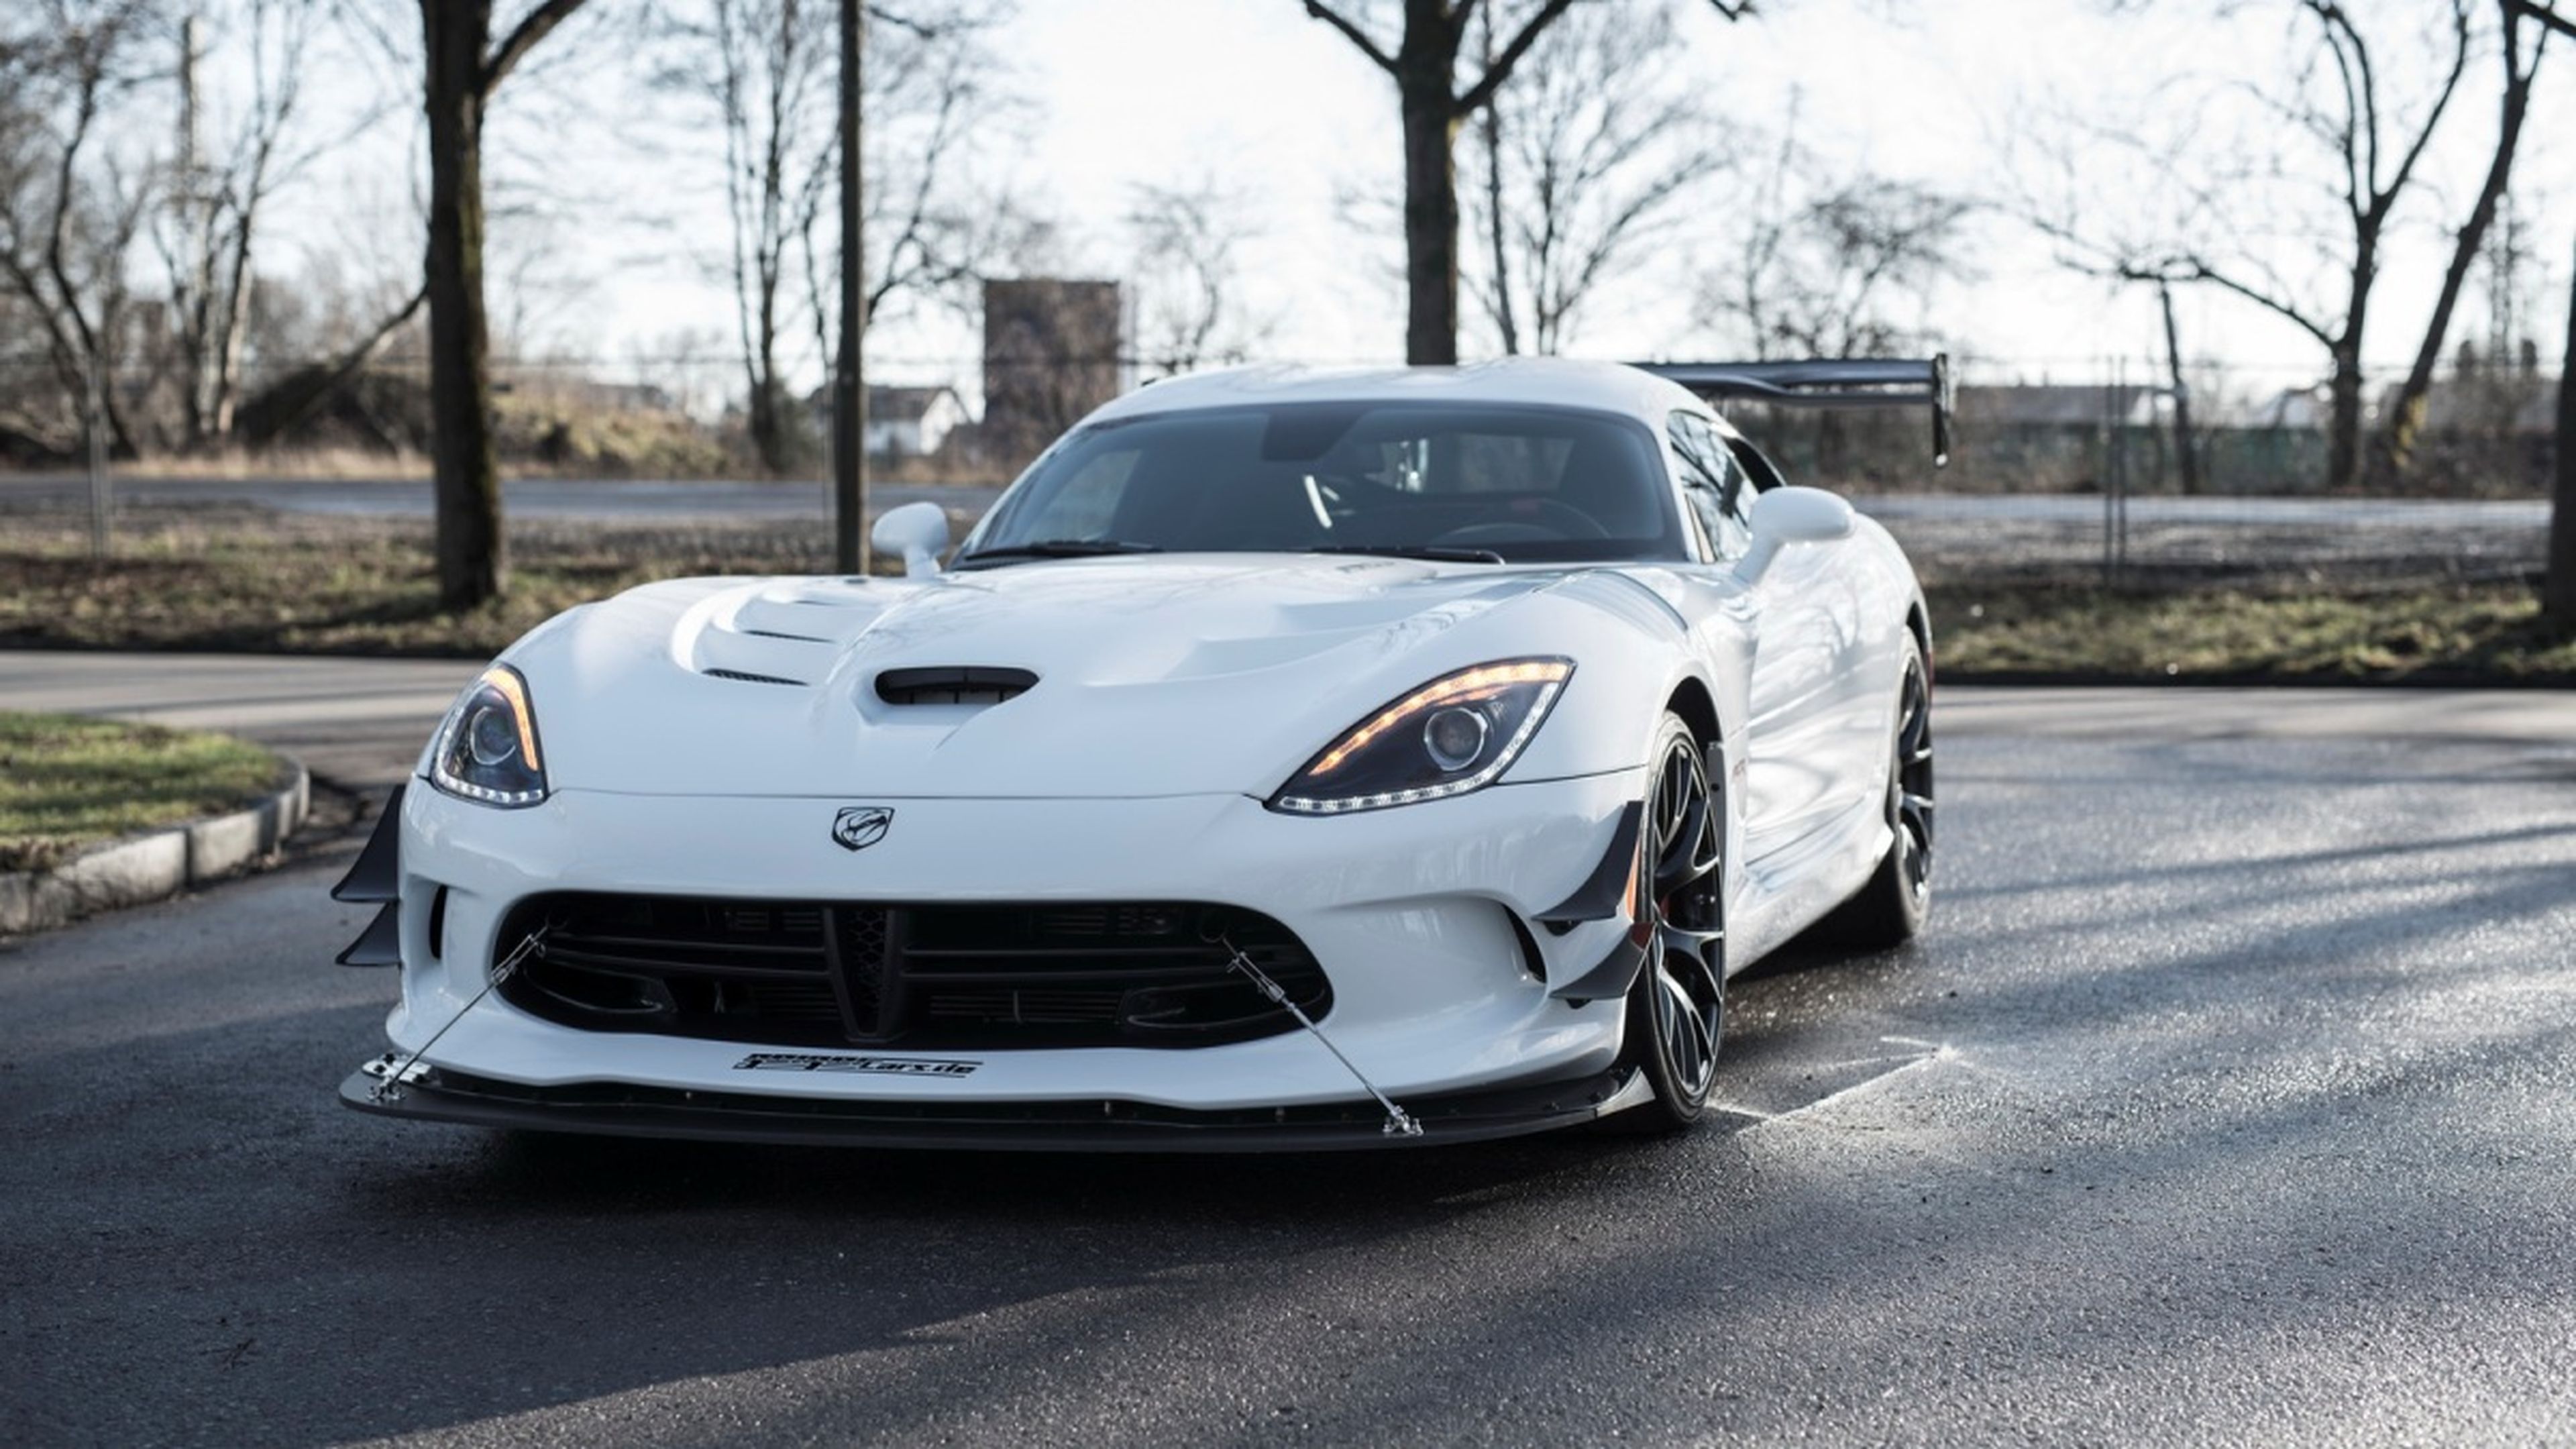 Dodge Viper ACR by Geiger frontal